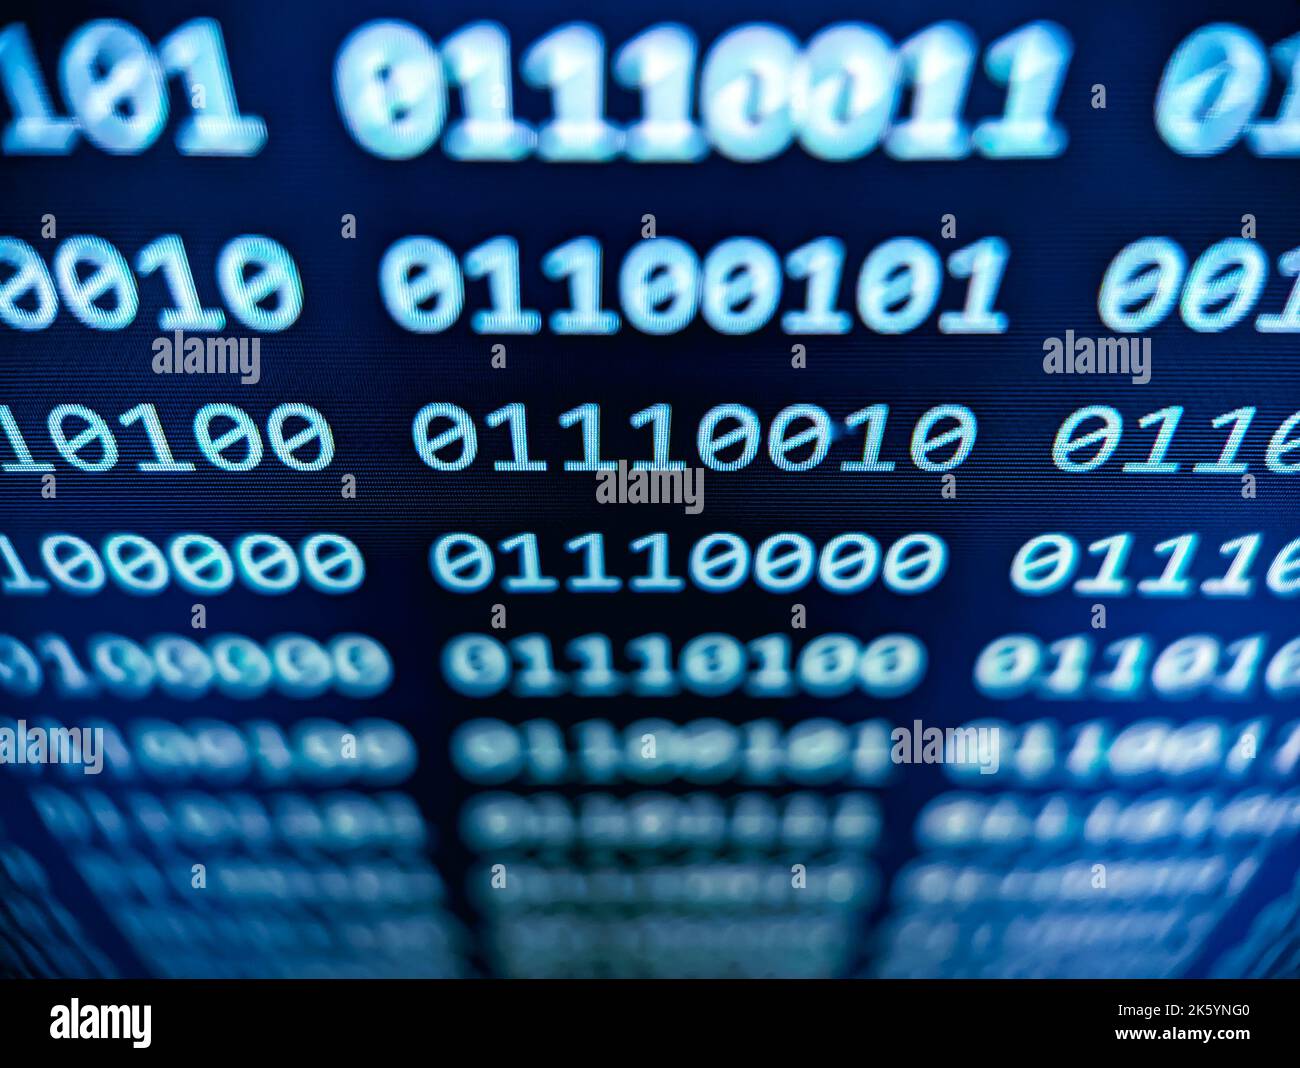 Closeup view of binary computer code with 1s and 0s displayed on a blue screen with a focus blur effect Stock Photo